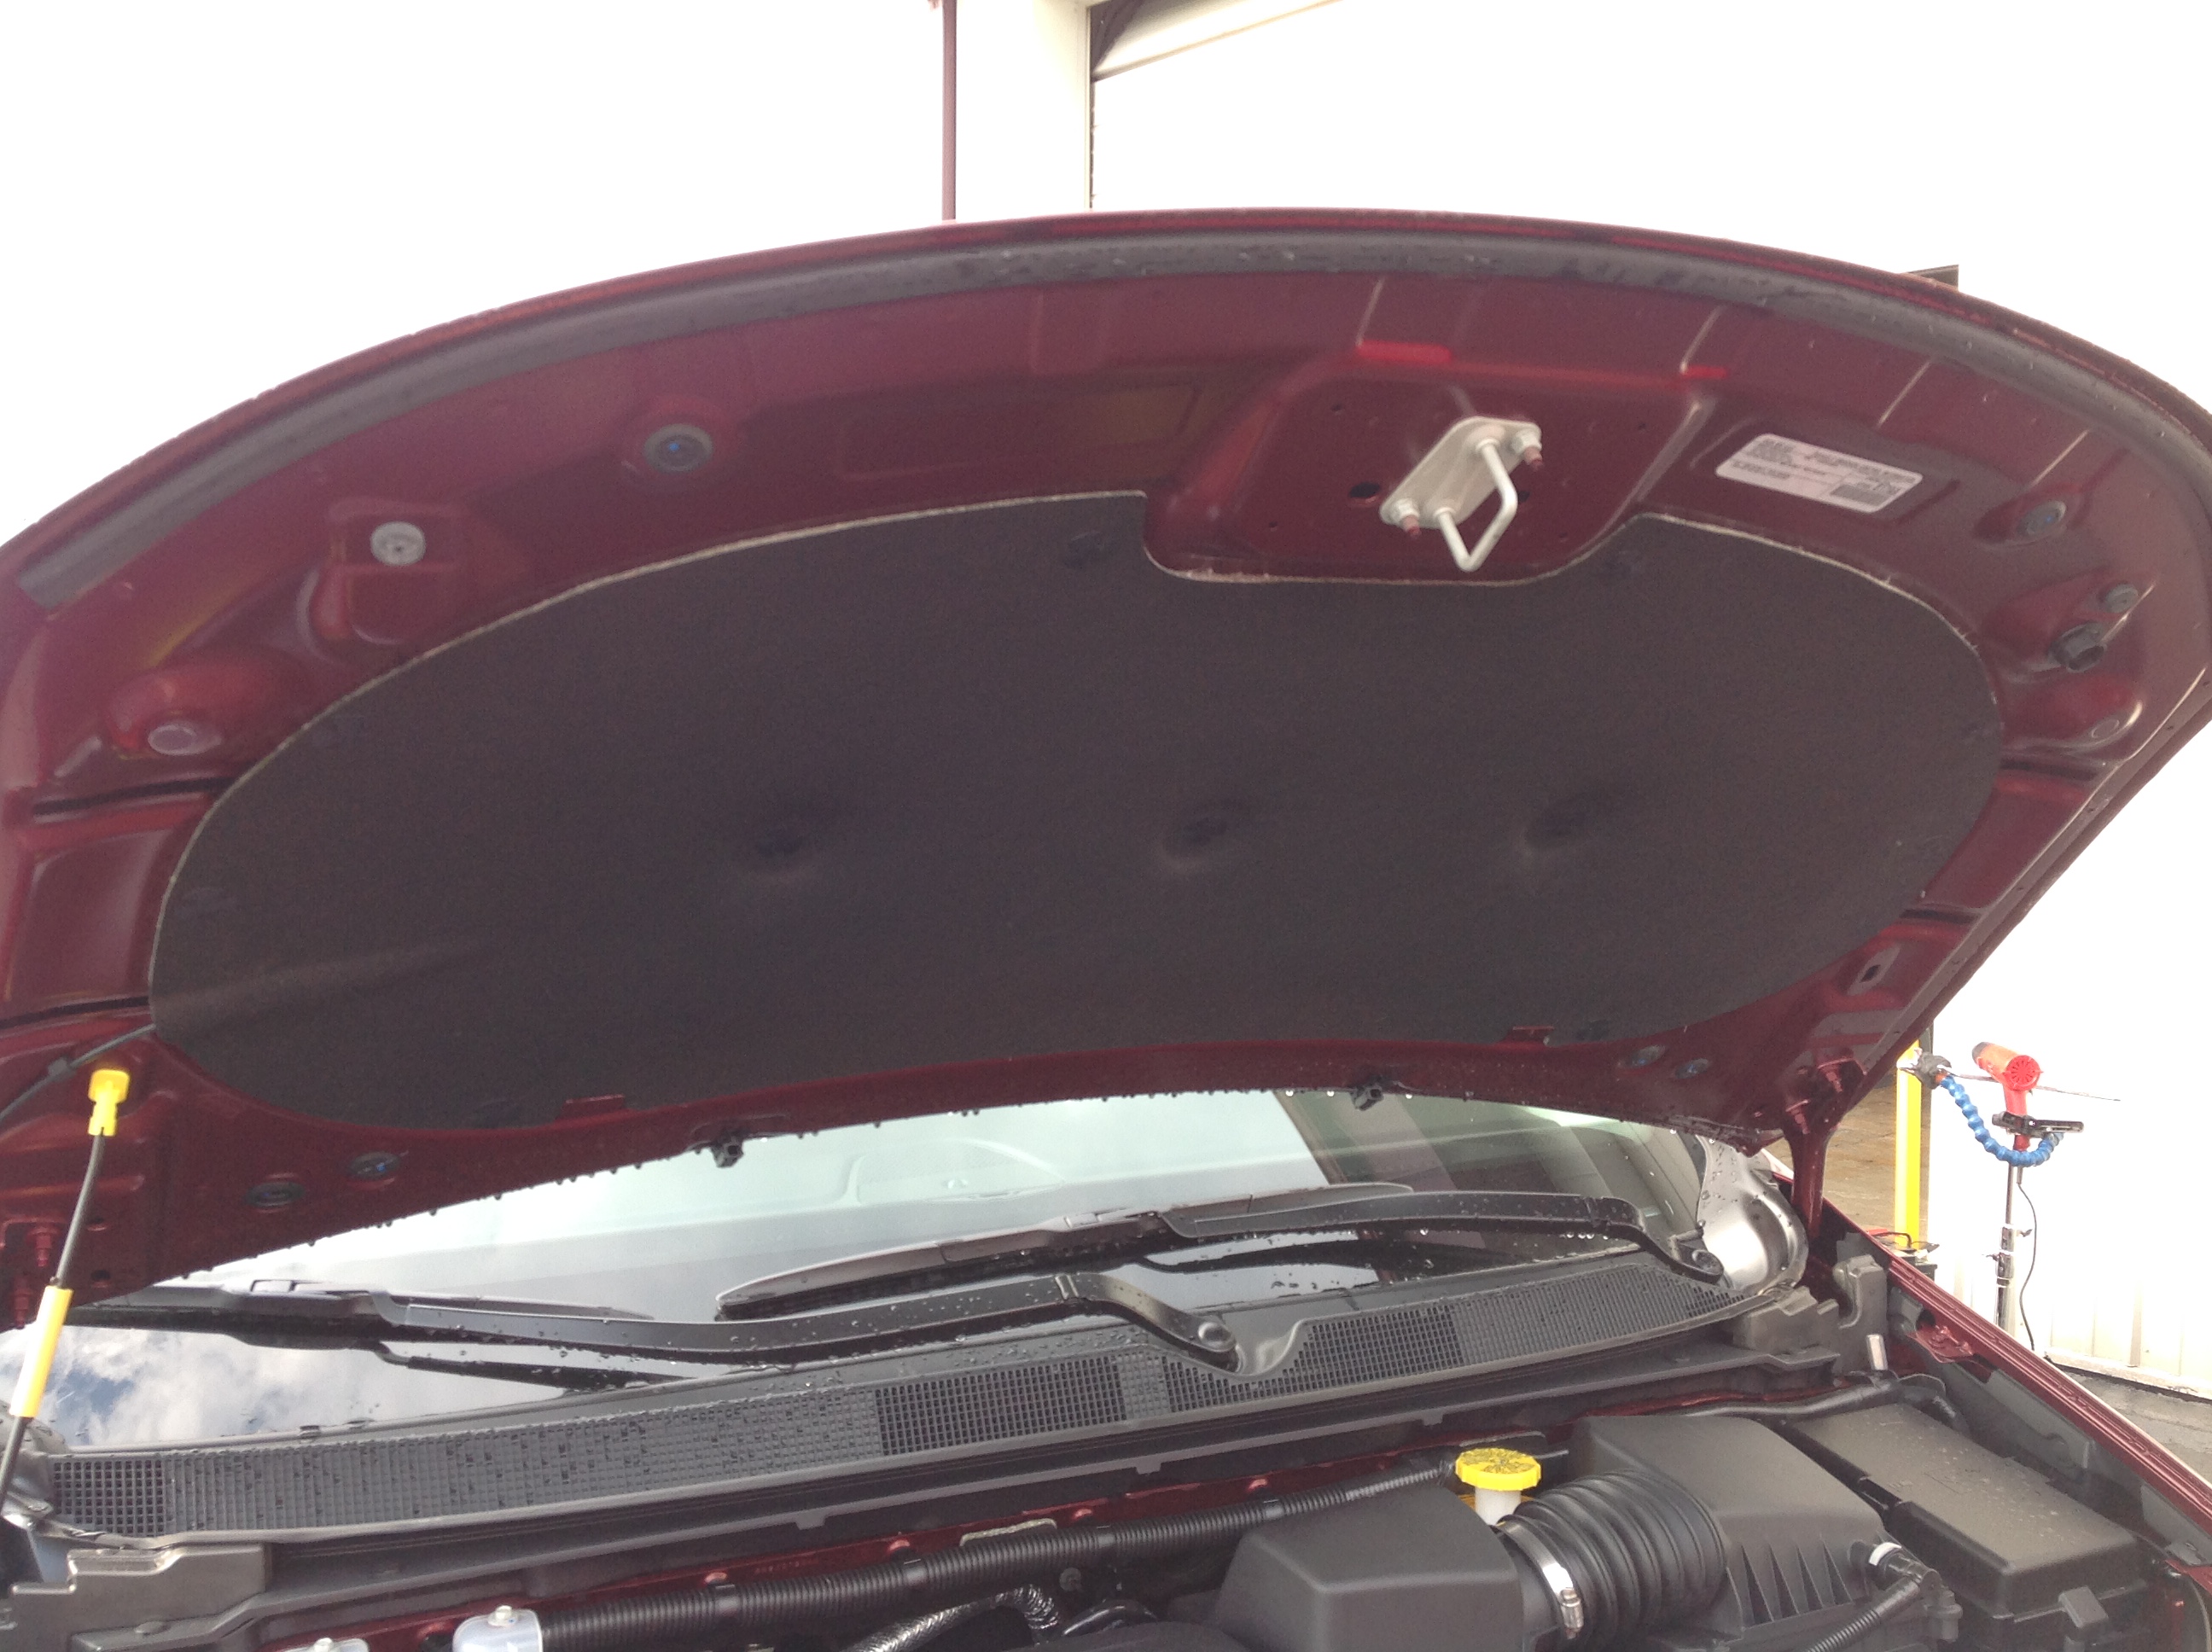 http://217Dent.com 2017 Chrysler Pacifica Aluminum Hood, PDR Factory Access to outter Skin, Excellent design, with an addition of extra body lines in the design. Springfield, IL Paintless Dent Repair Expert Michael Bocek